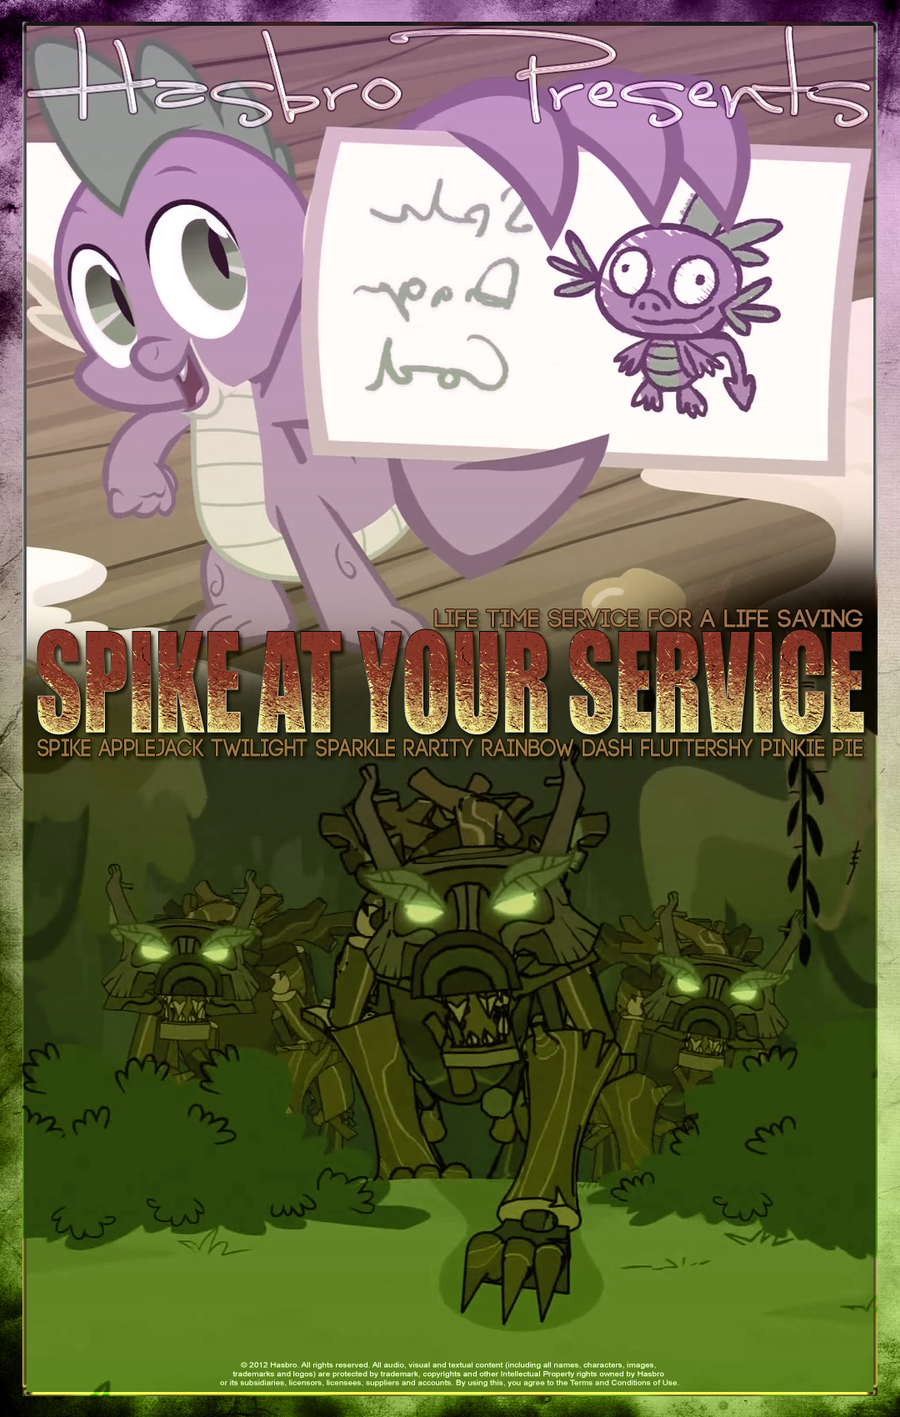 mlp___spike_at_your_service___movie_poster_by_pims1978-d5ppirh.png